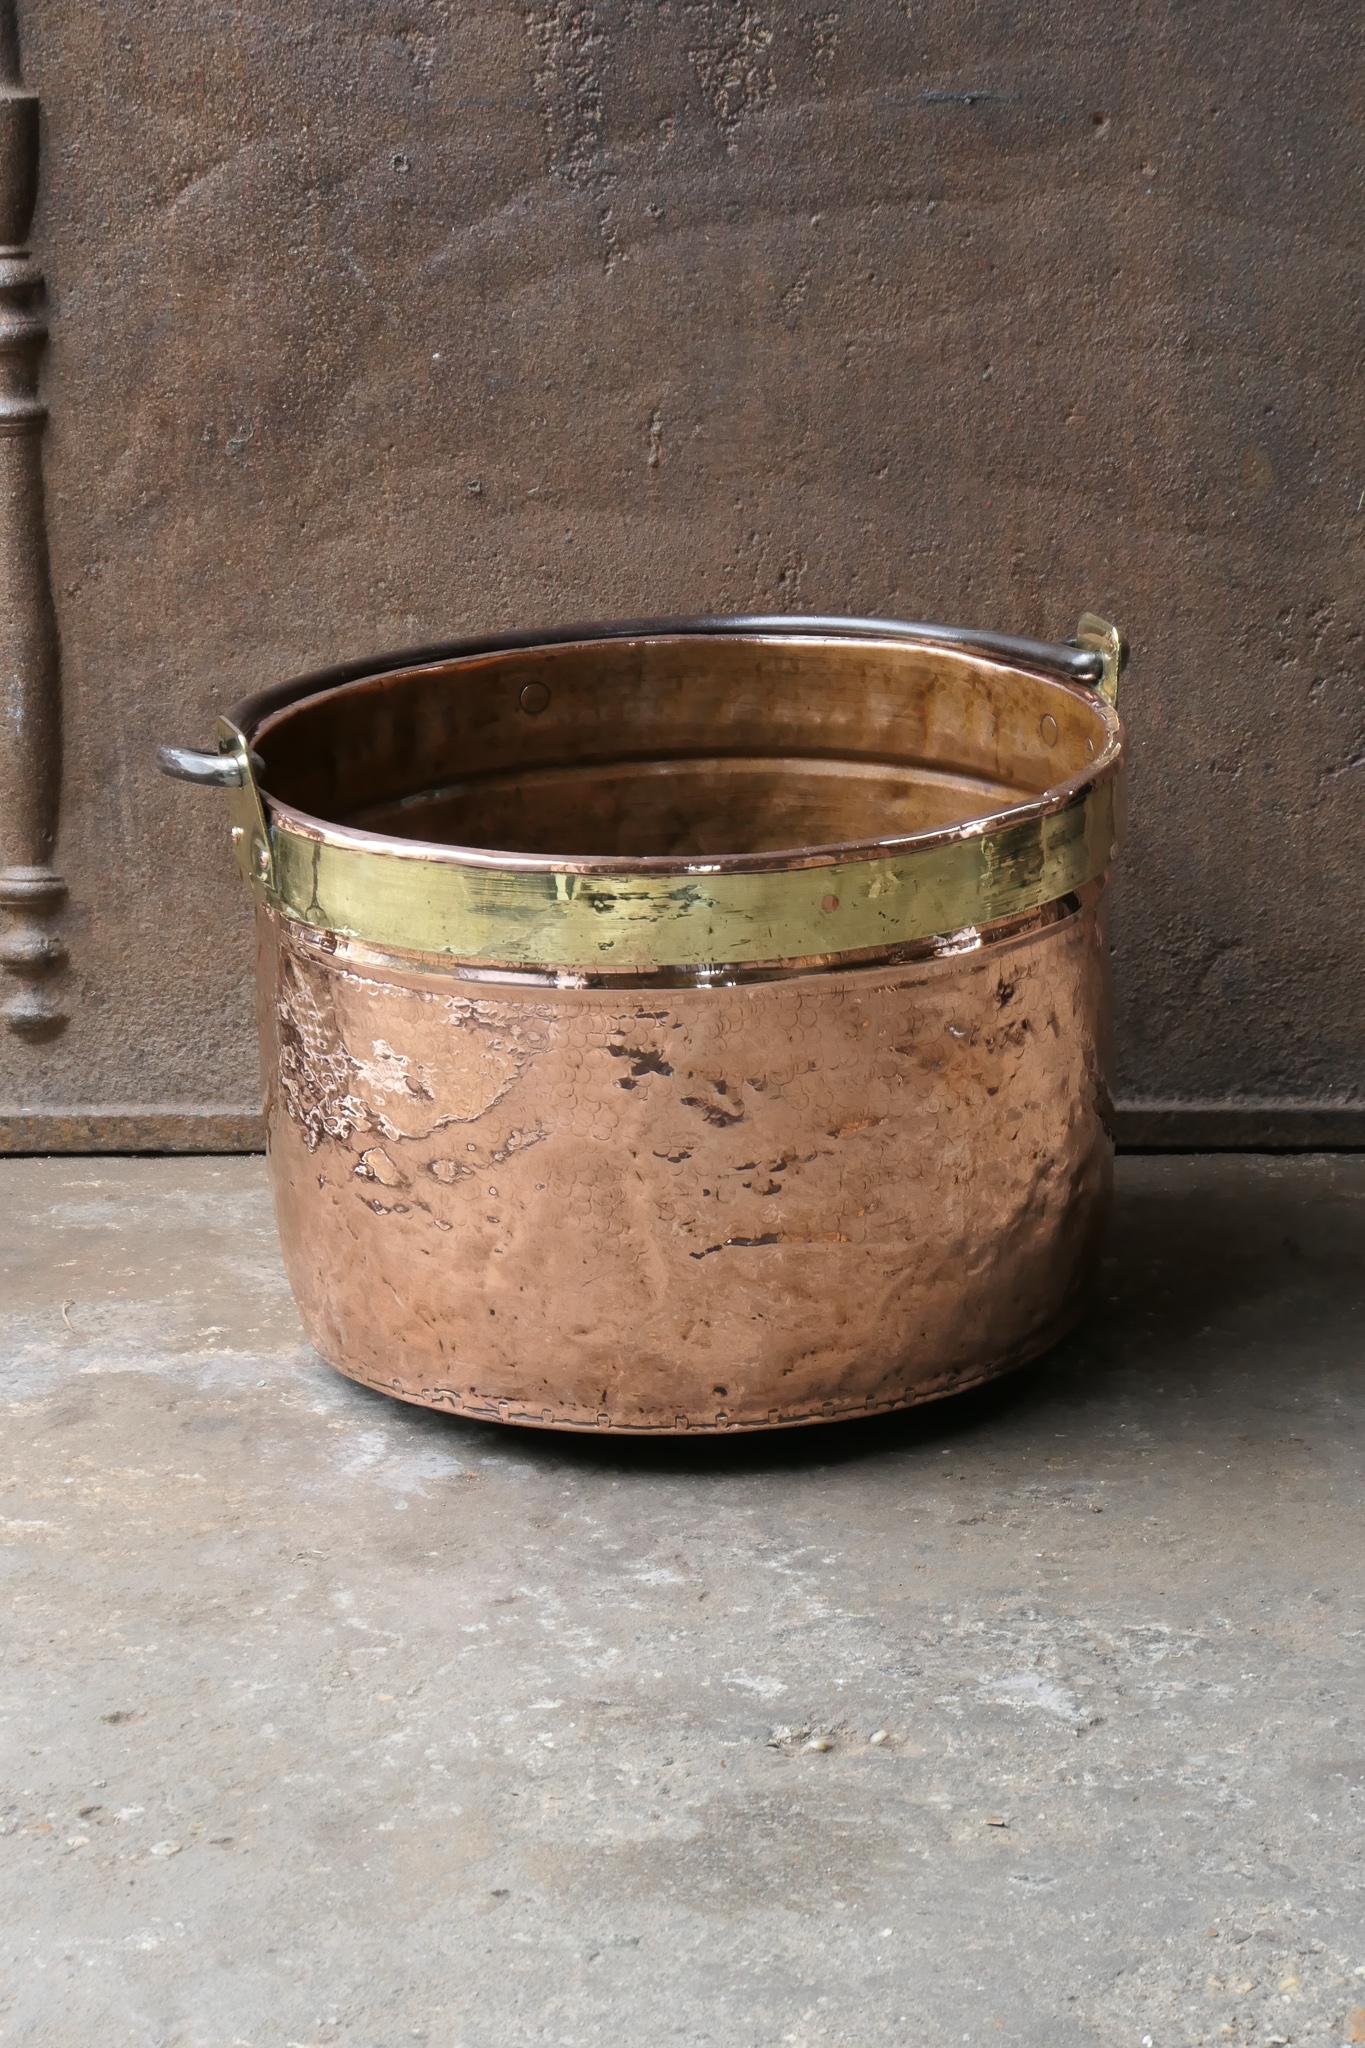 18th-19th century Dutch neoclassical log basket. The firewood basket is made of polished copper with a polished brass ring and has a wrought iron handle. Also called 'aker'. Used to draw water from the well and cook over an open fire.

The log